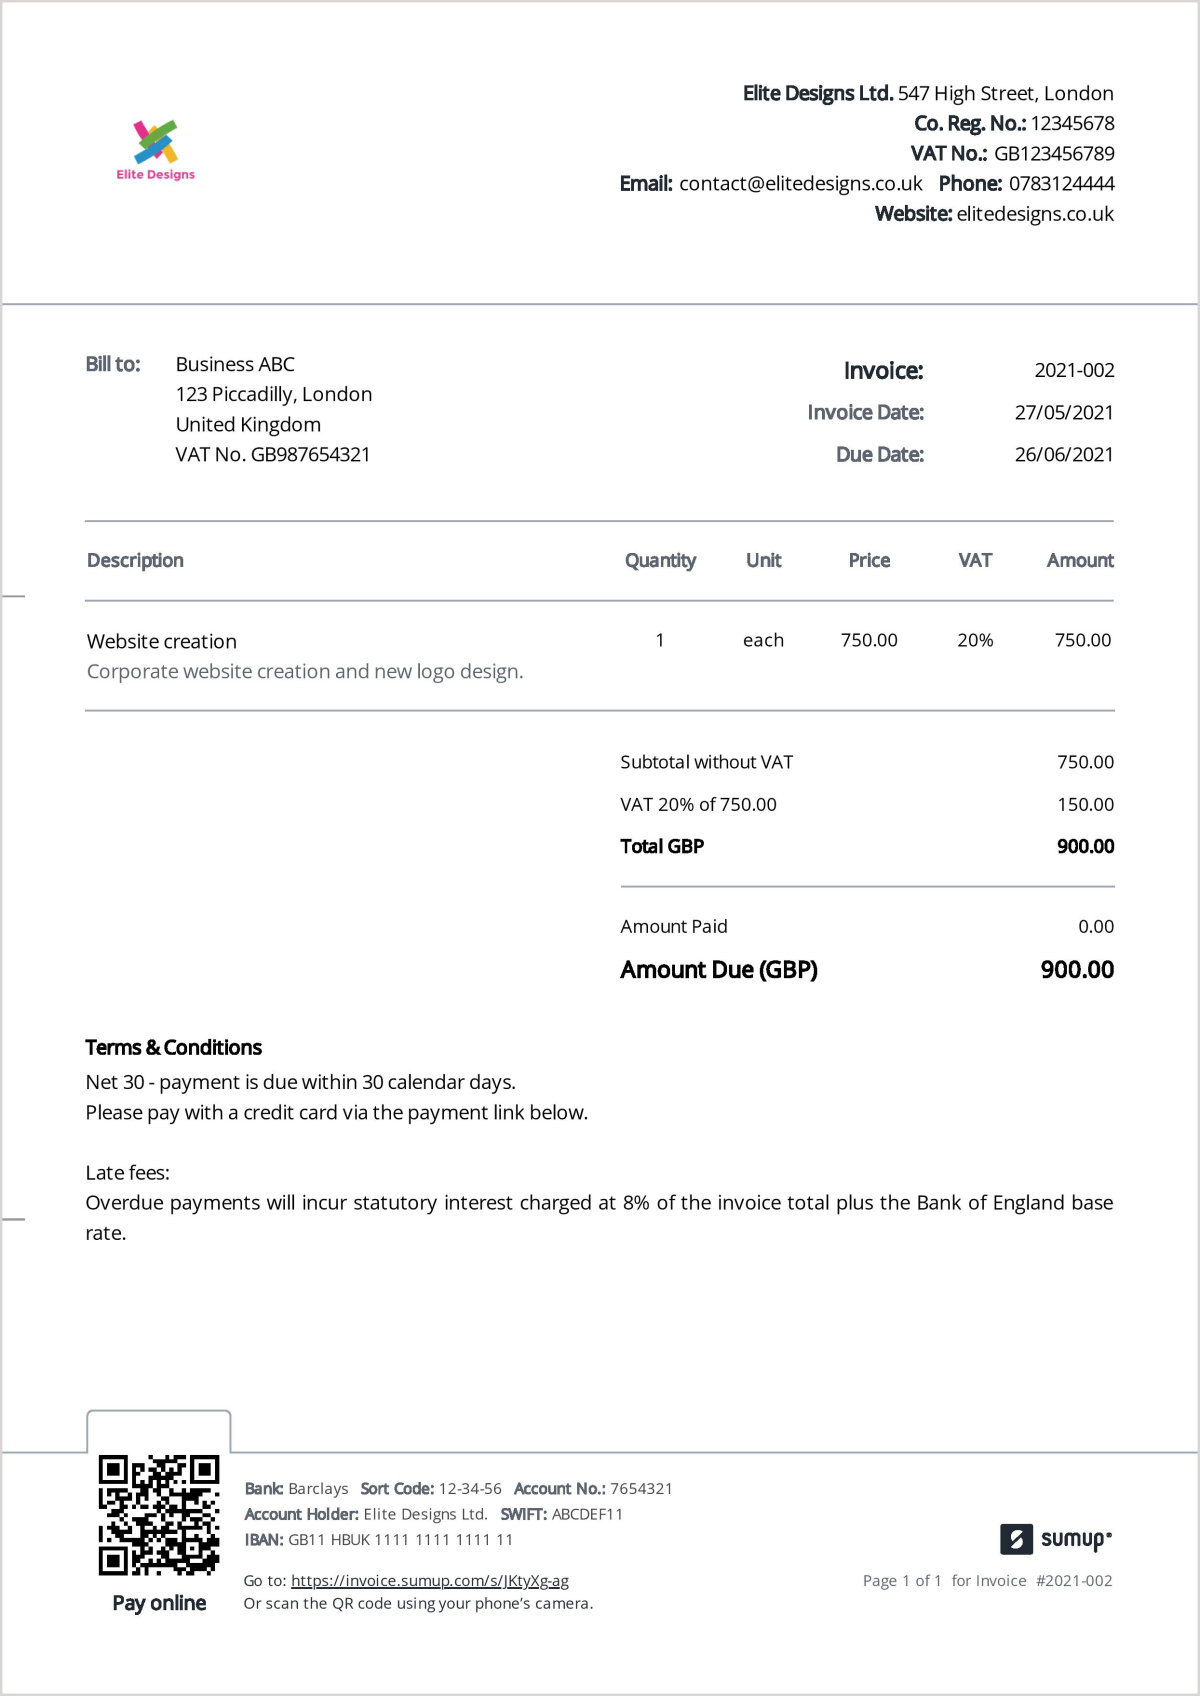 Sample invoice containing late fees created with SumUp Invoices.